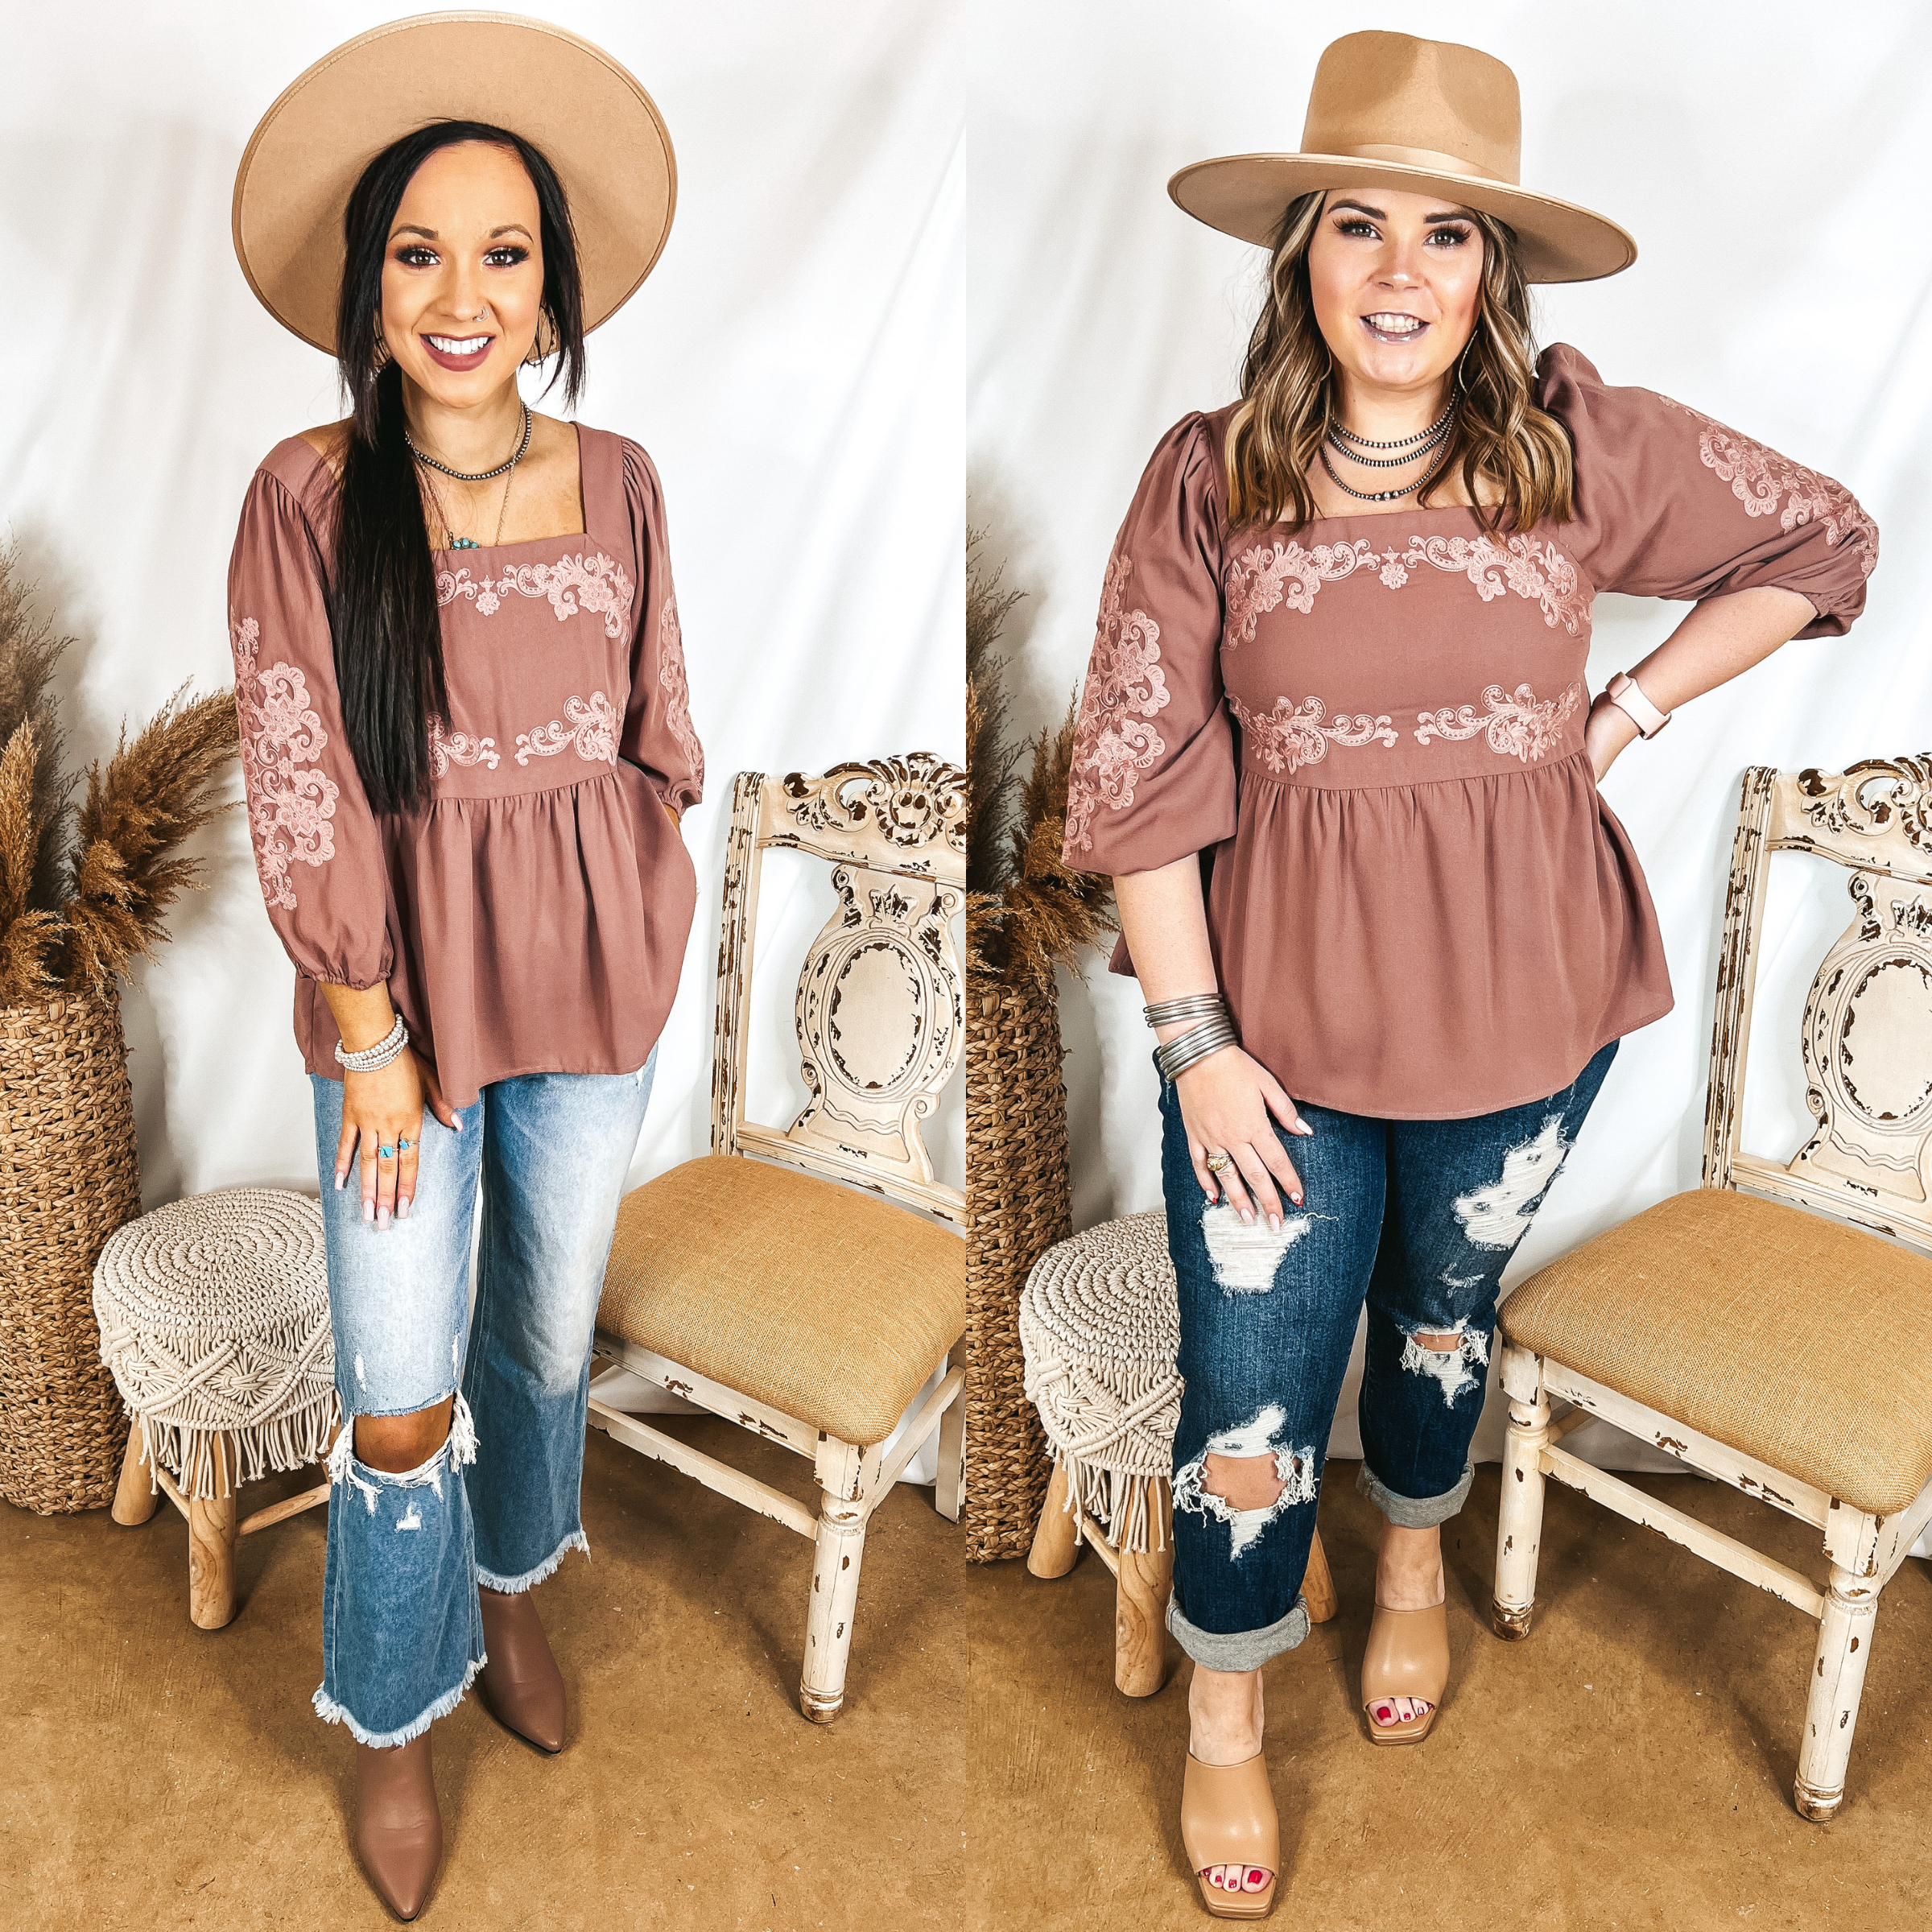 Models are wearing a square neckline blouse in mauve pink. Size small model has it paired with distressed cropped flare jeans, brown booties, and a tan hat. Size large model has it paired with distressed boyfriend jeans, tan heels, and a tan hat.